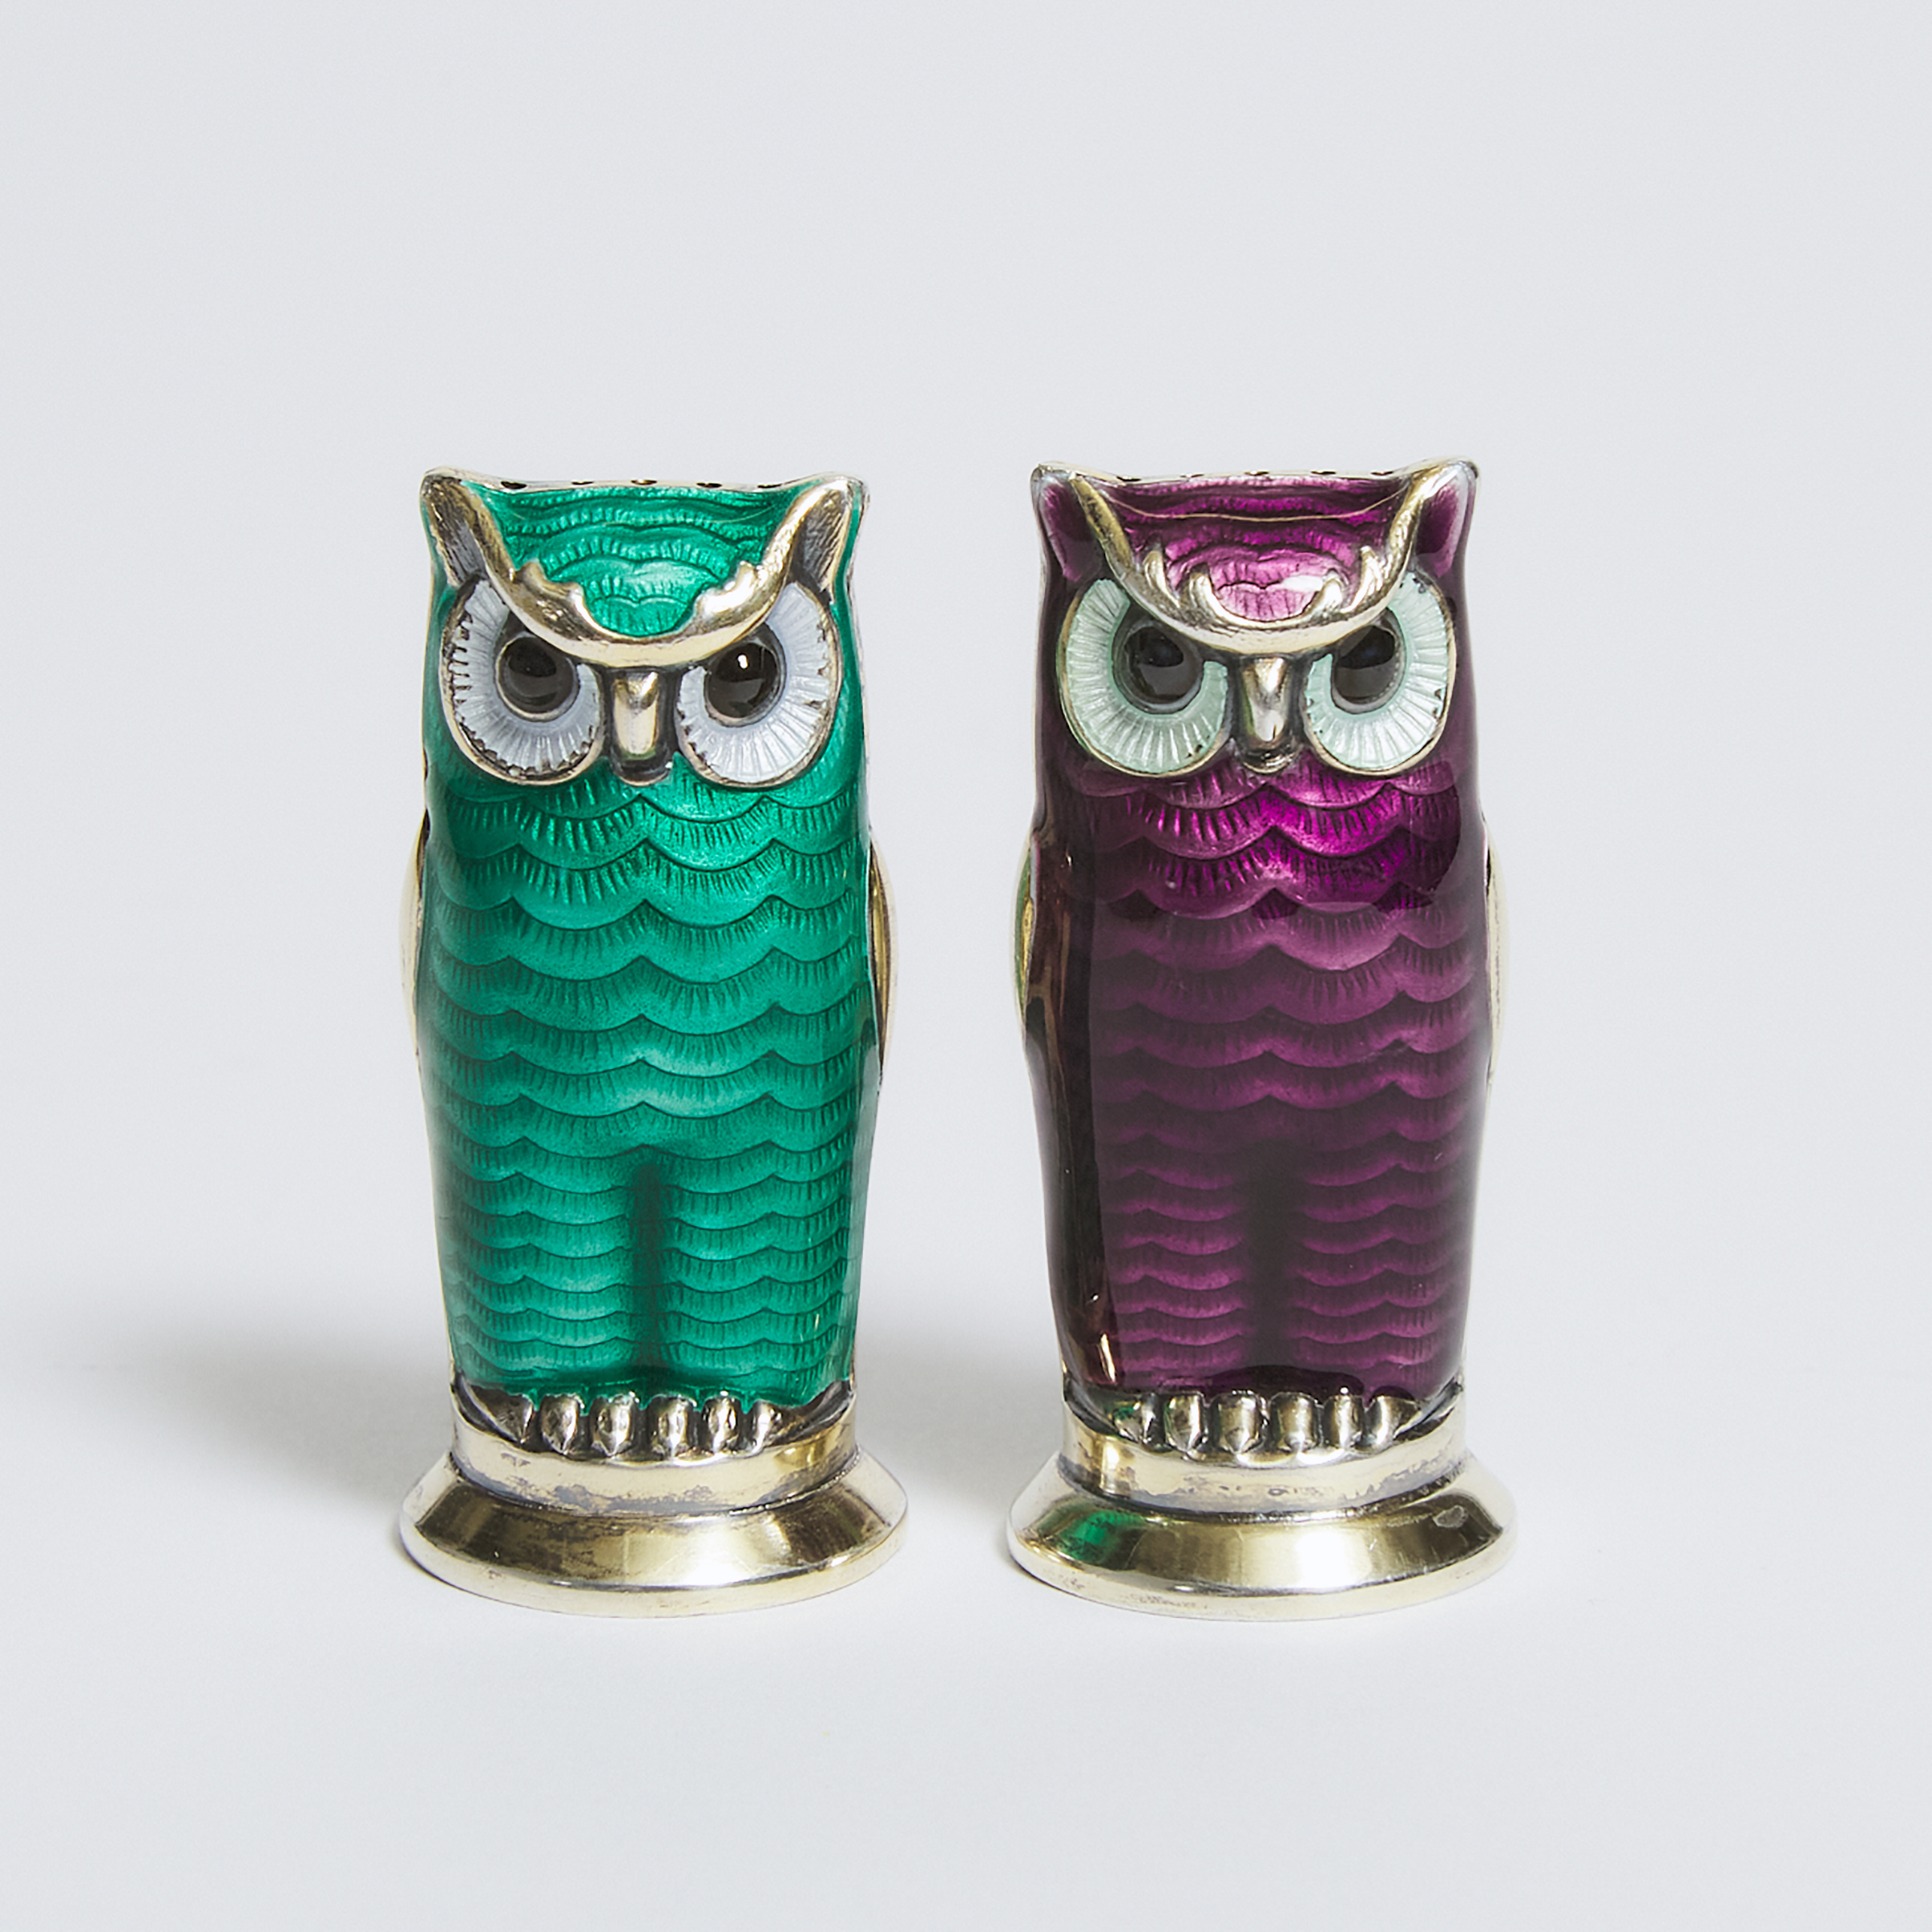 Pair of Norwegian Enameled Silver Owl-Form Salt and Pepper Casters, David Andersen, Oslo, 20th century